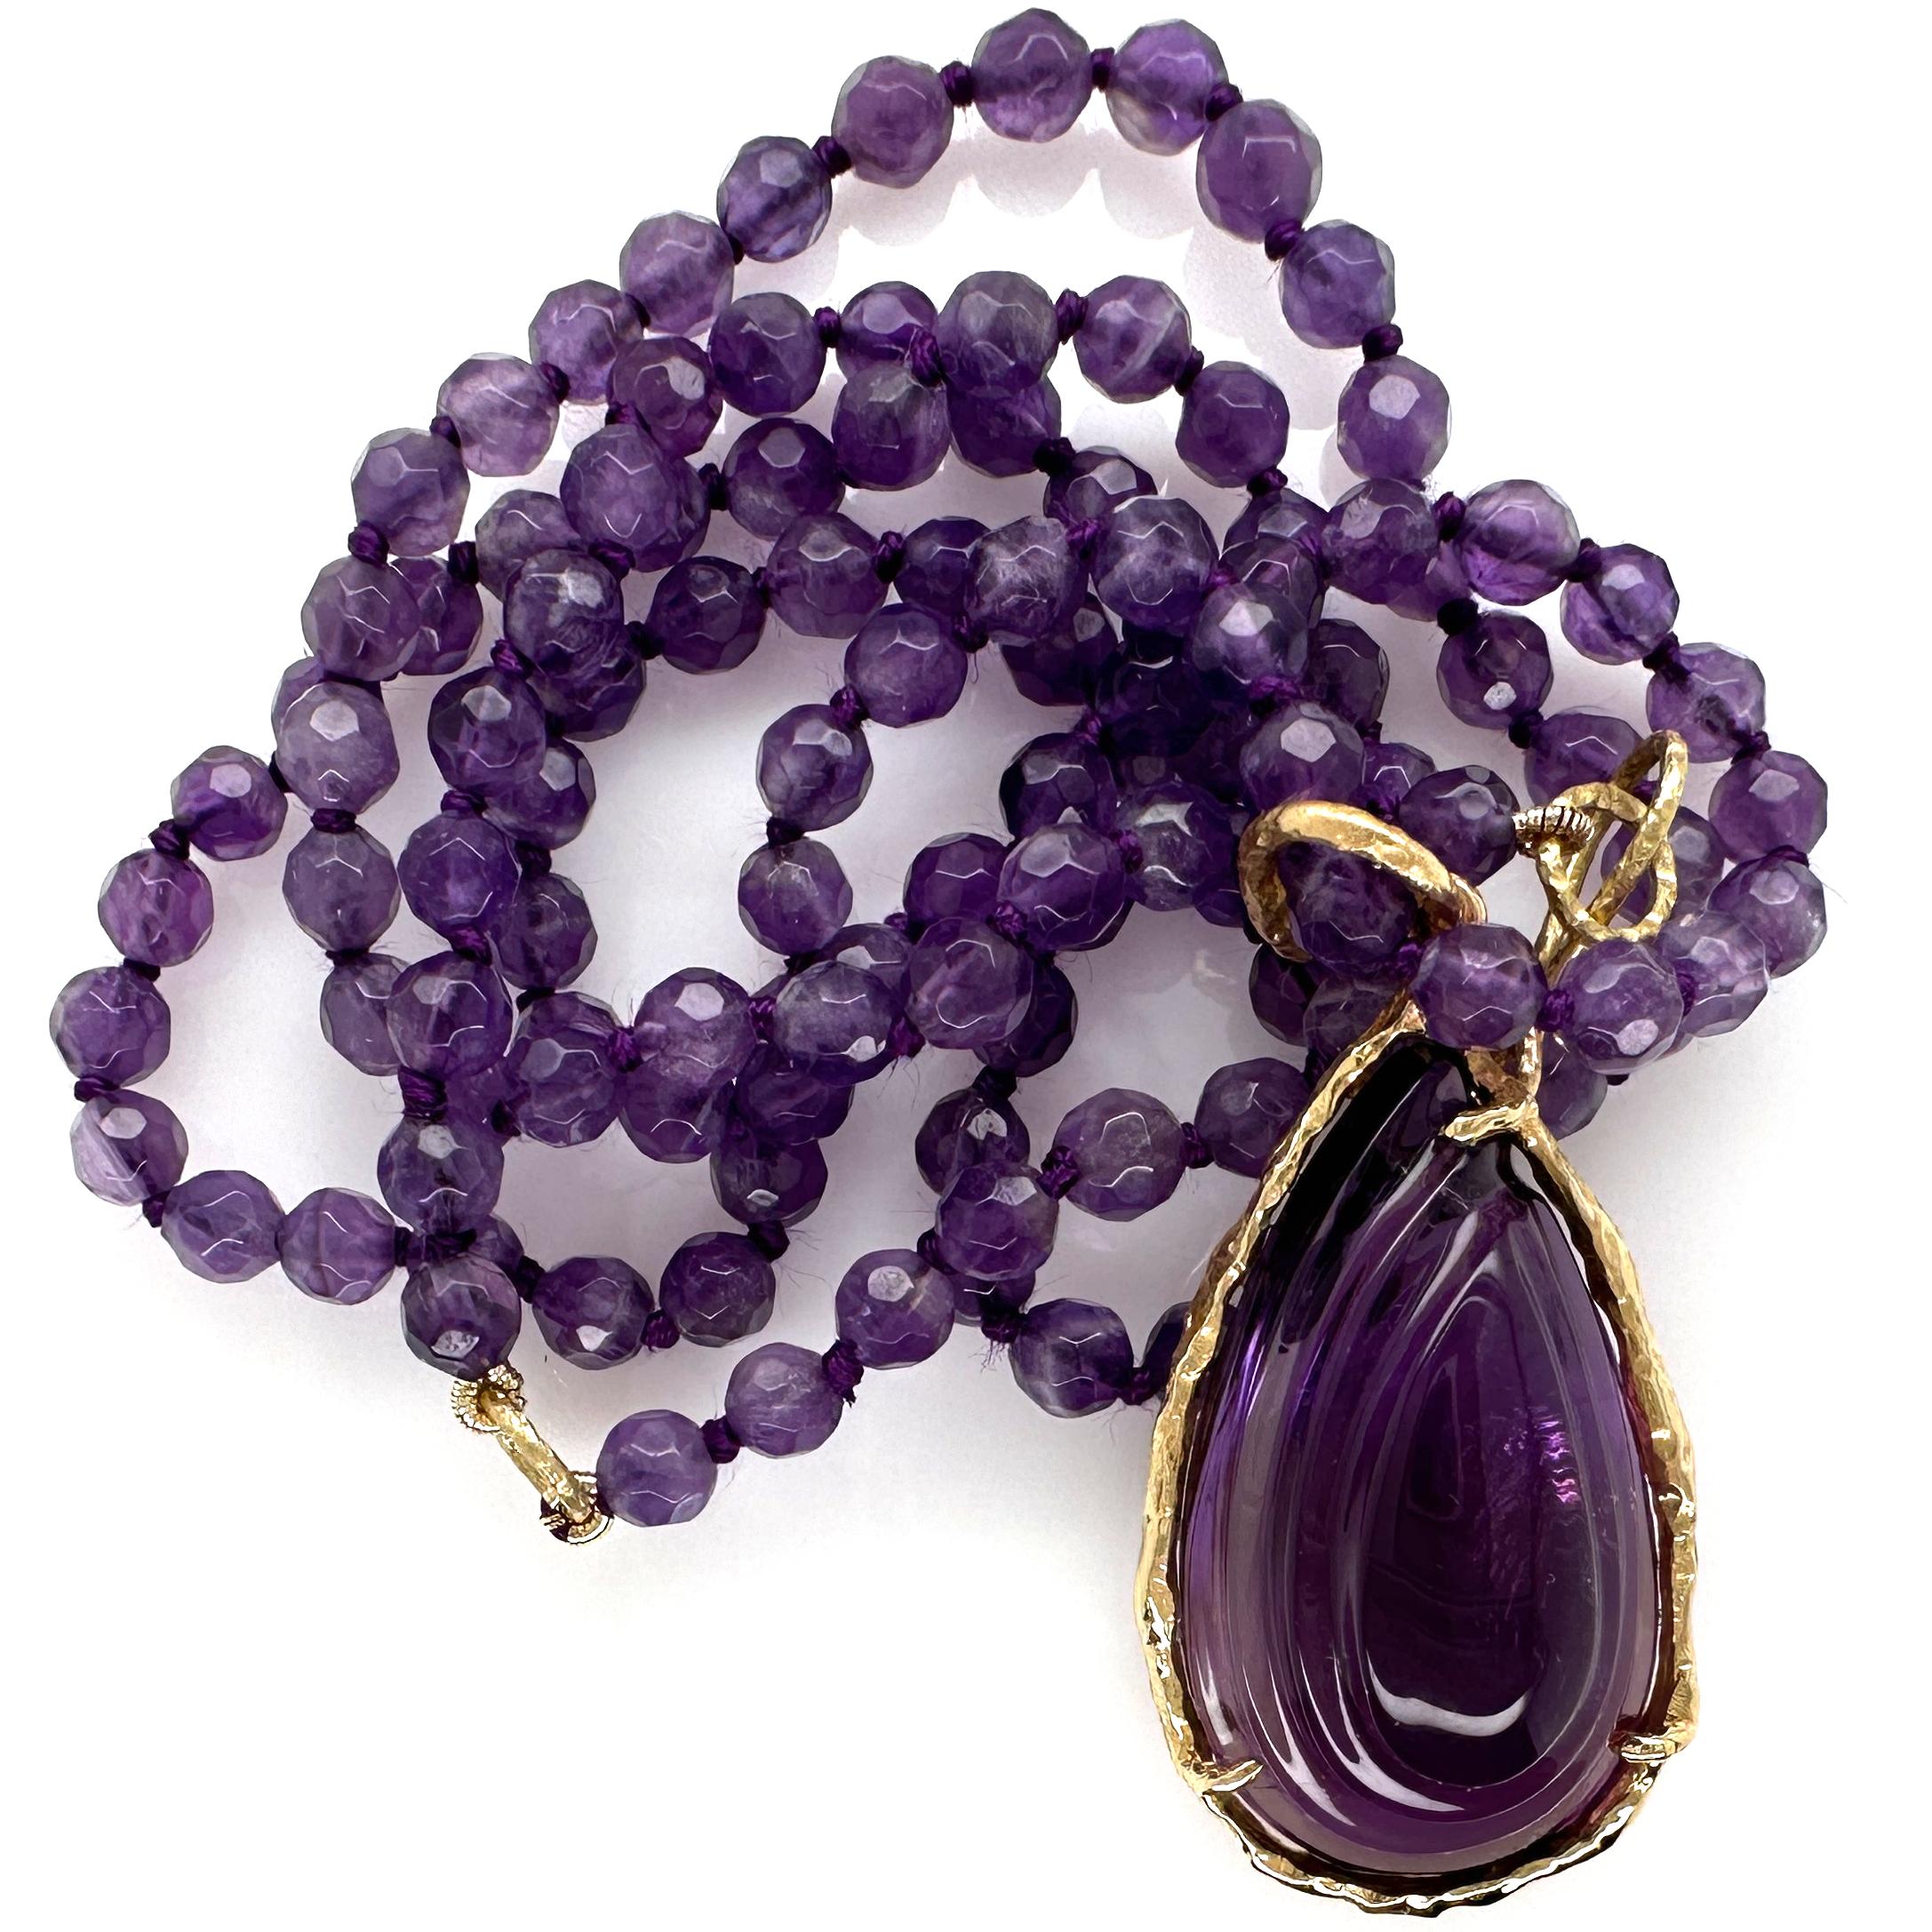 This graceful carved amethyst teardrop is part of a trio of amethyst drops purchased by Eytan Brandes at a trade show several years ago.  Opting to break up the set, Eytan made the two smaller drops into dressy earrings accented with diamonds.  (You